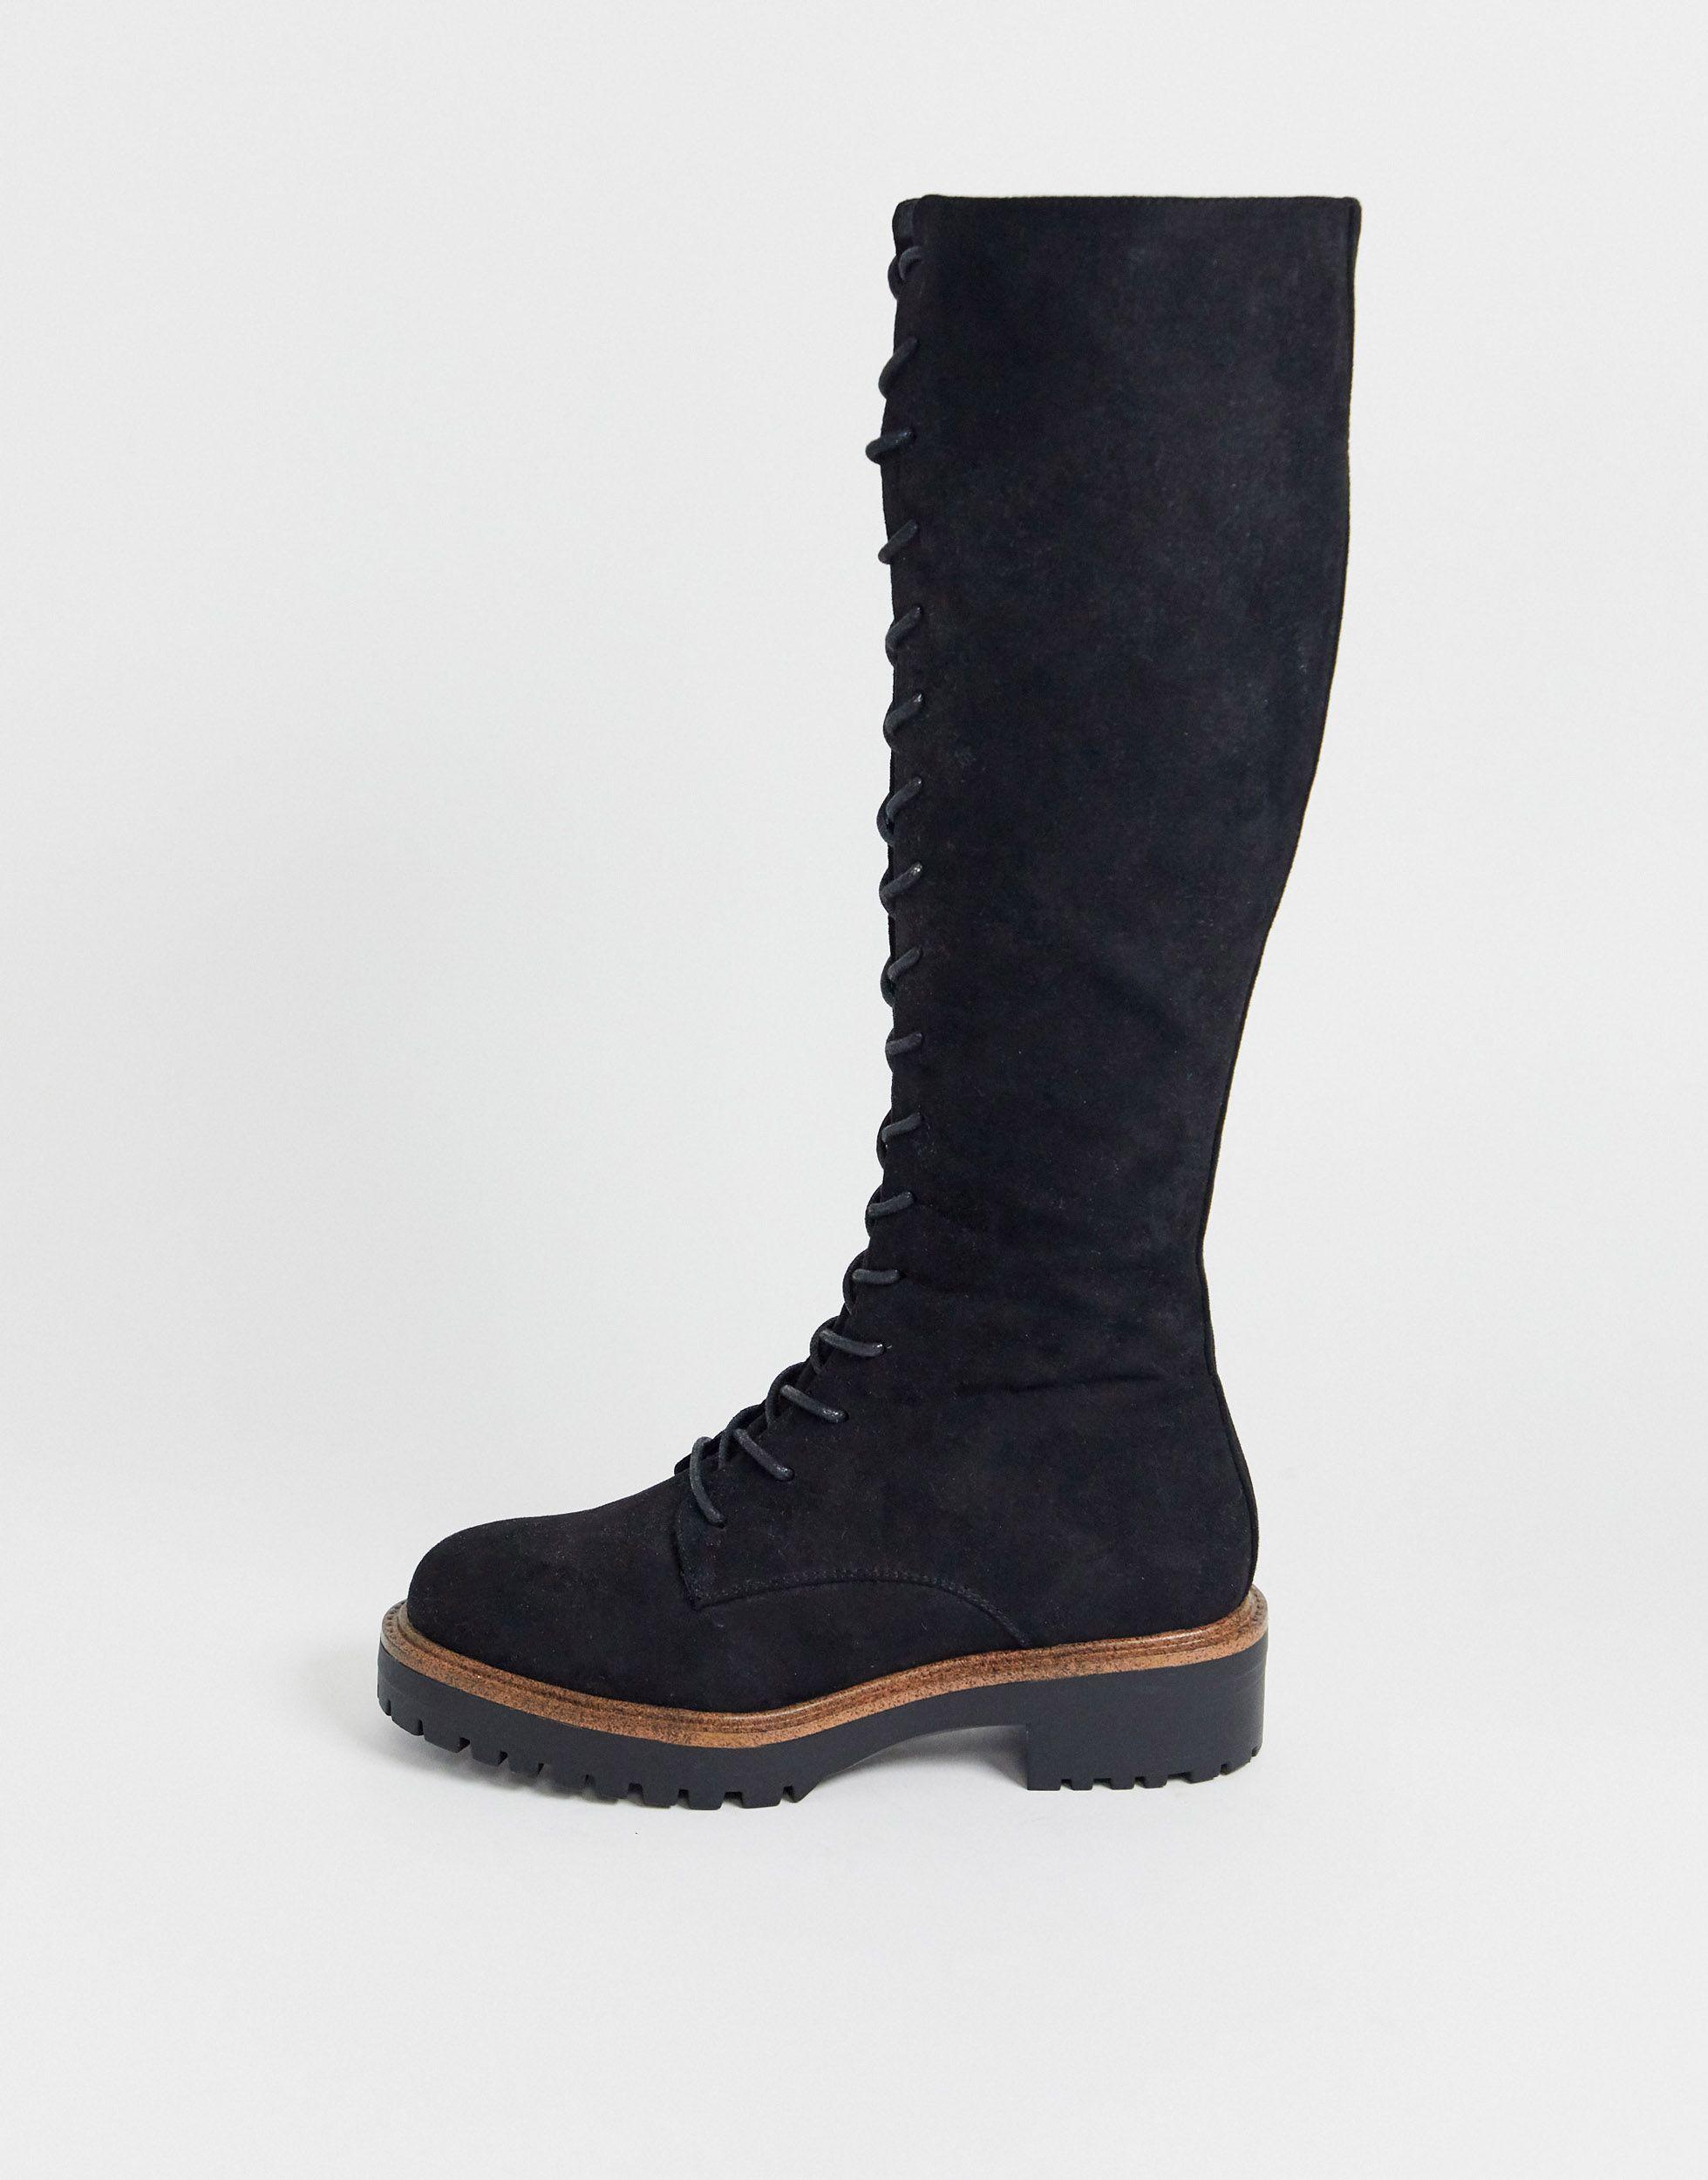 ASOS Courtney Chunky Lace Up Knee High Boots in Black - Lyst